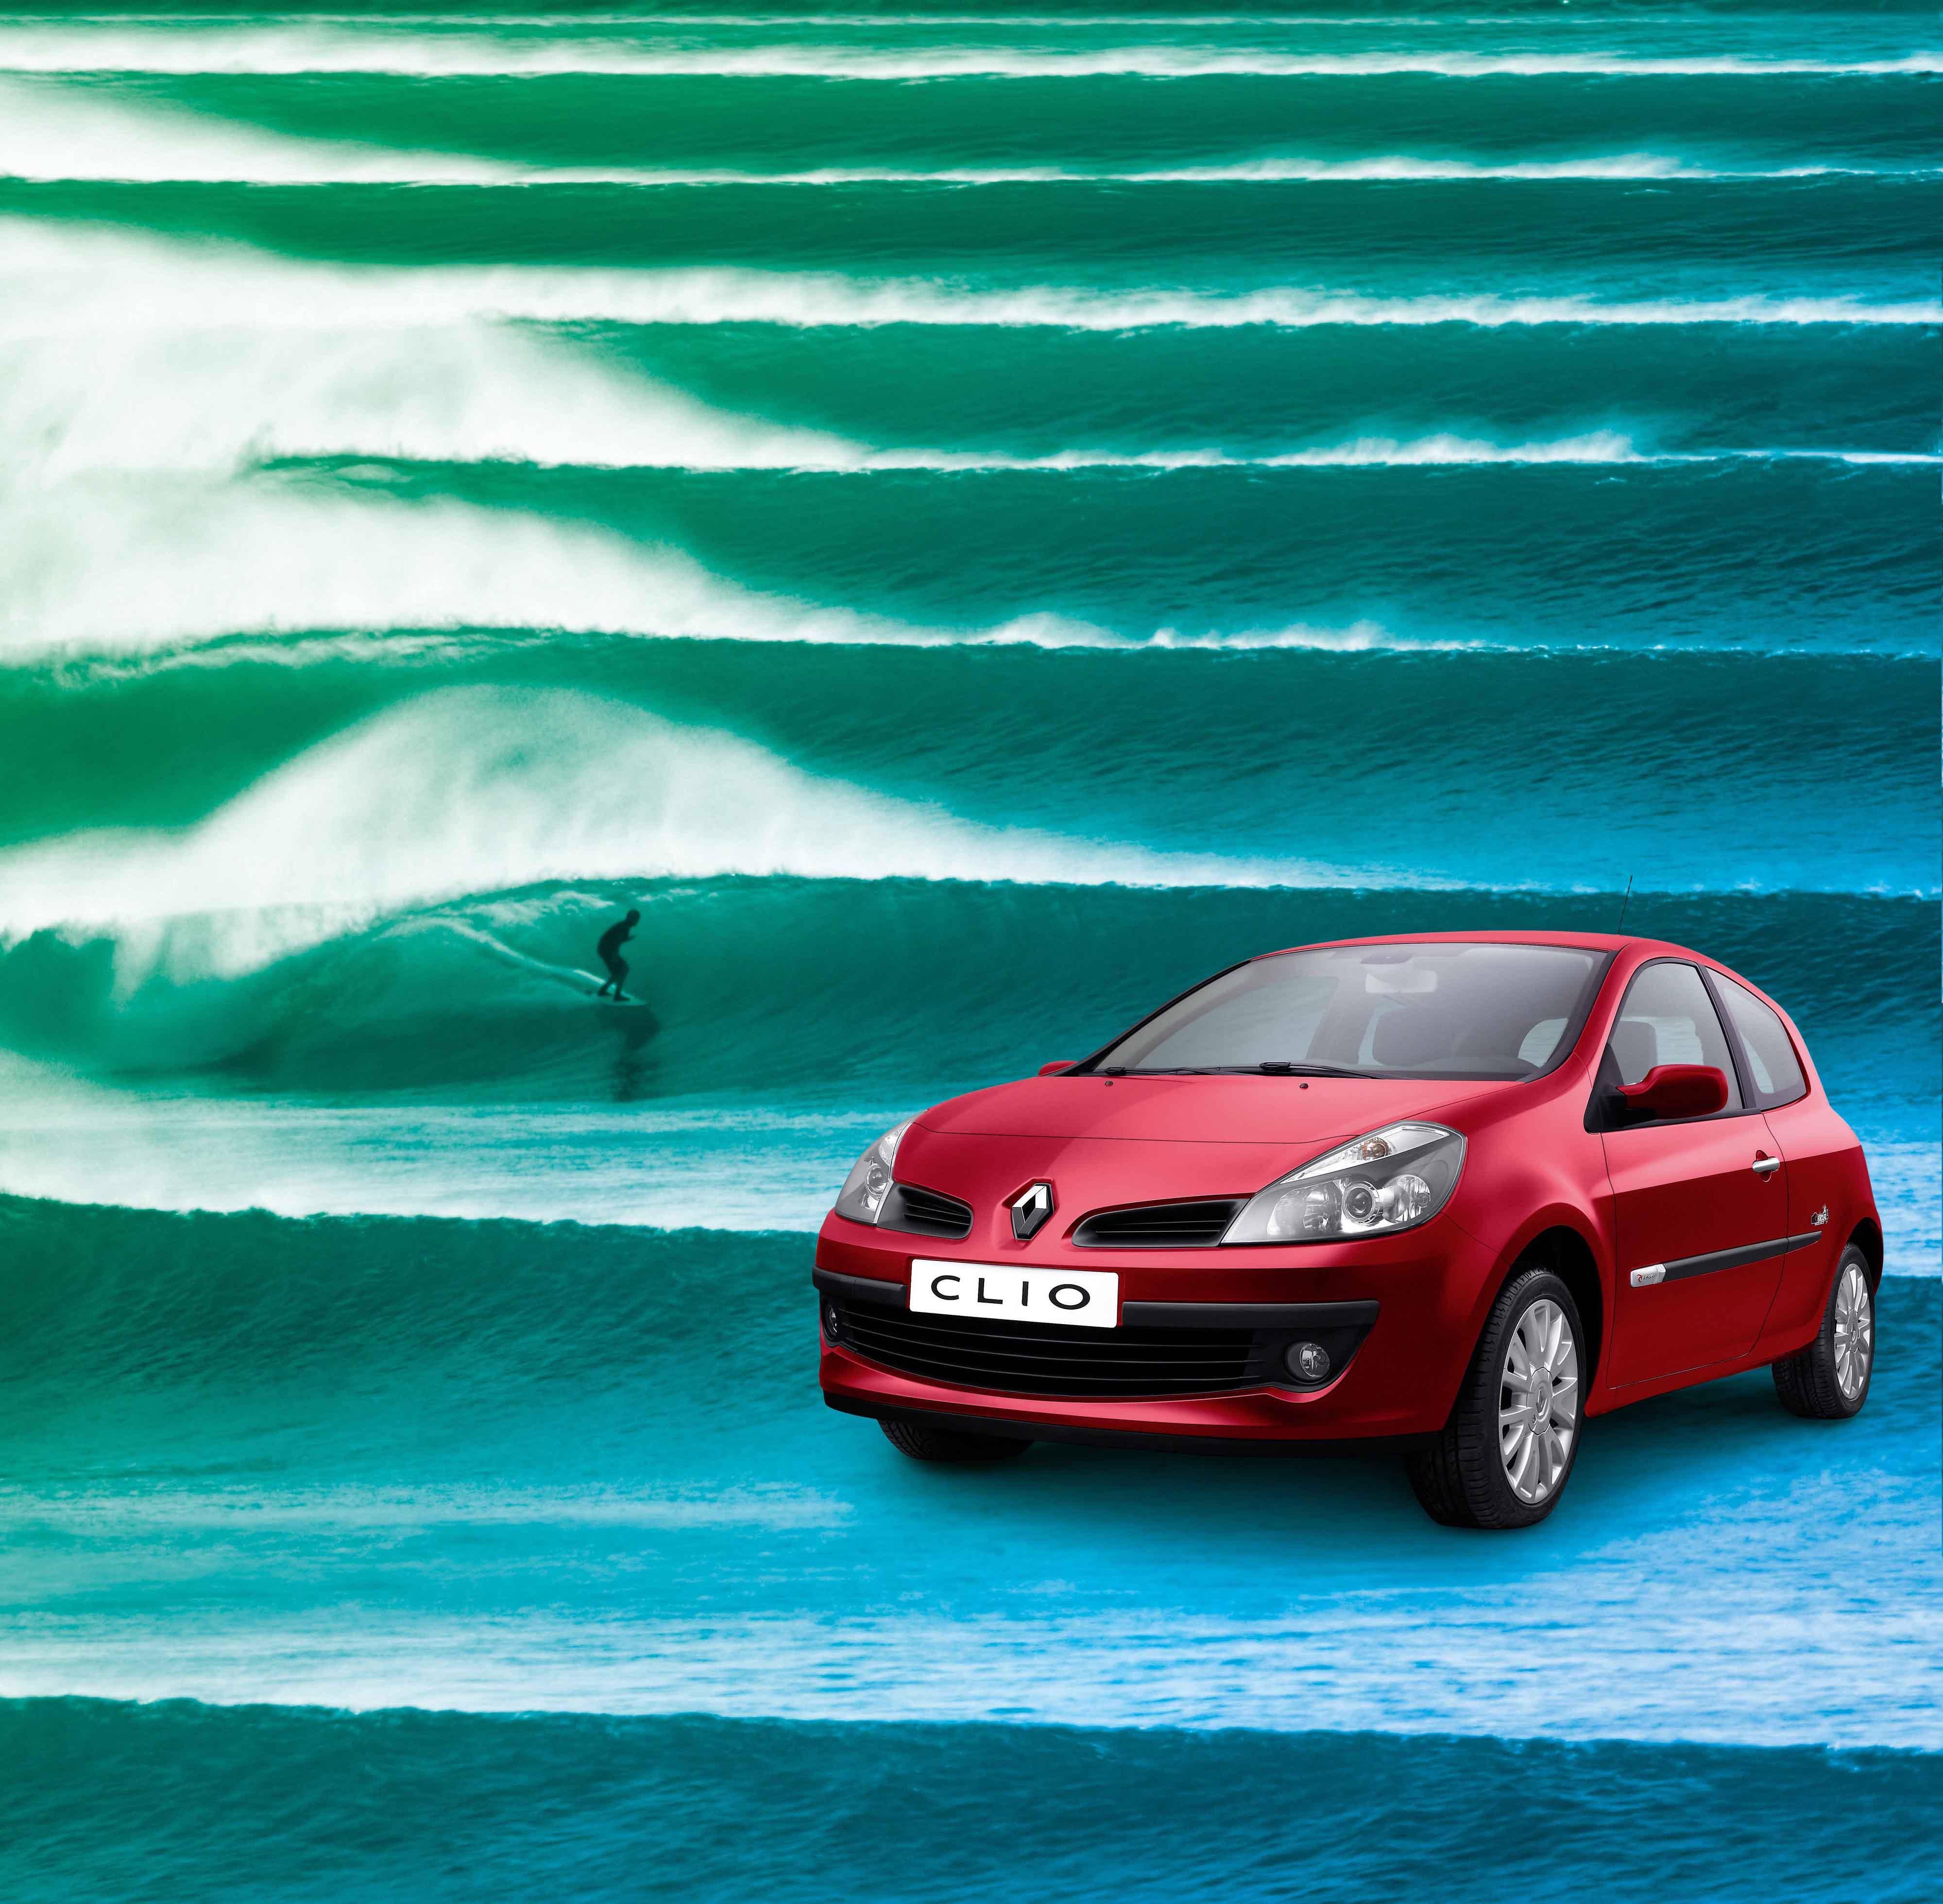 2008 Renault Clio by Rip Curl